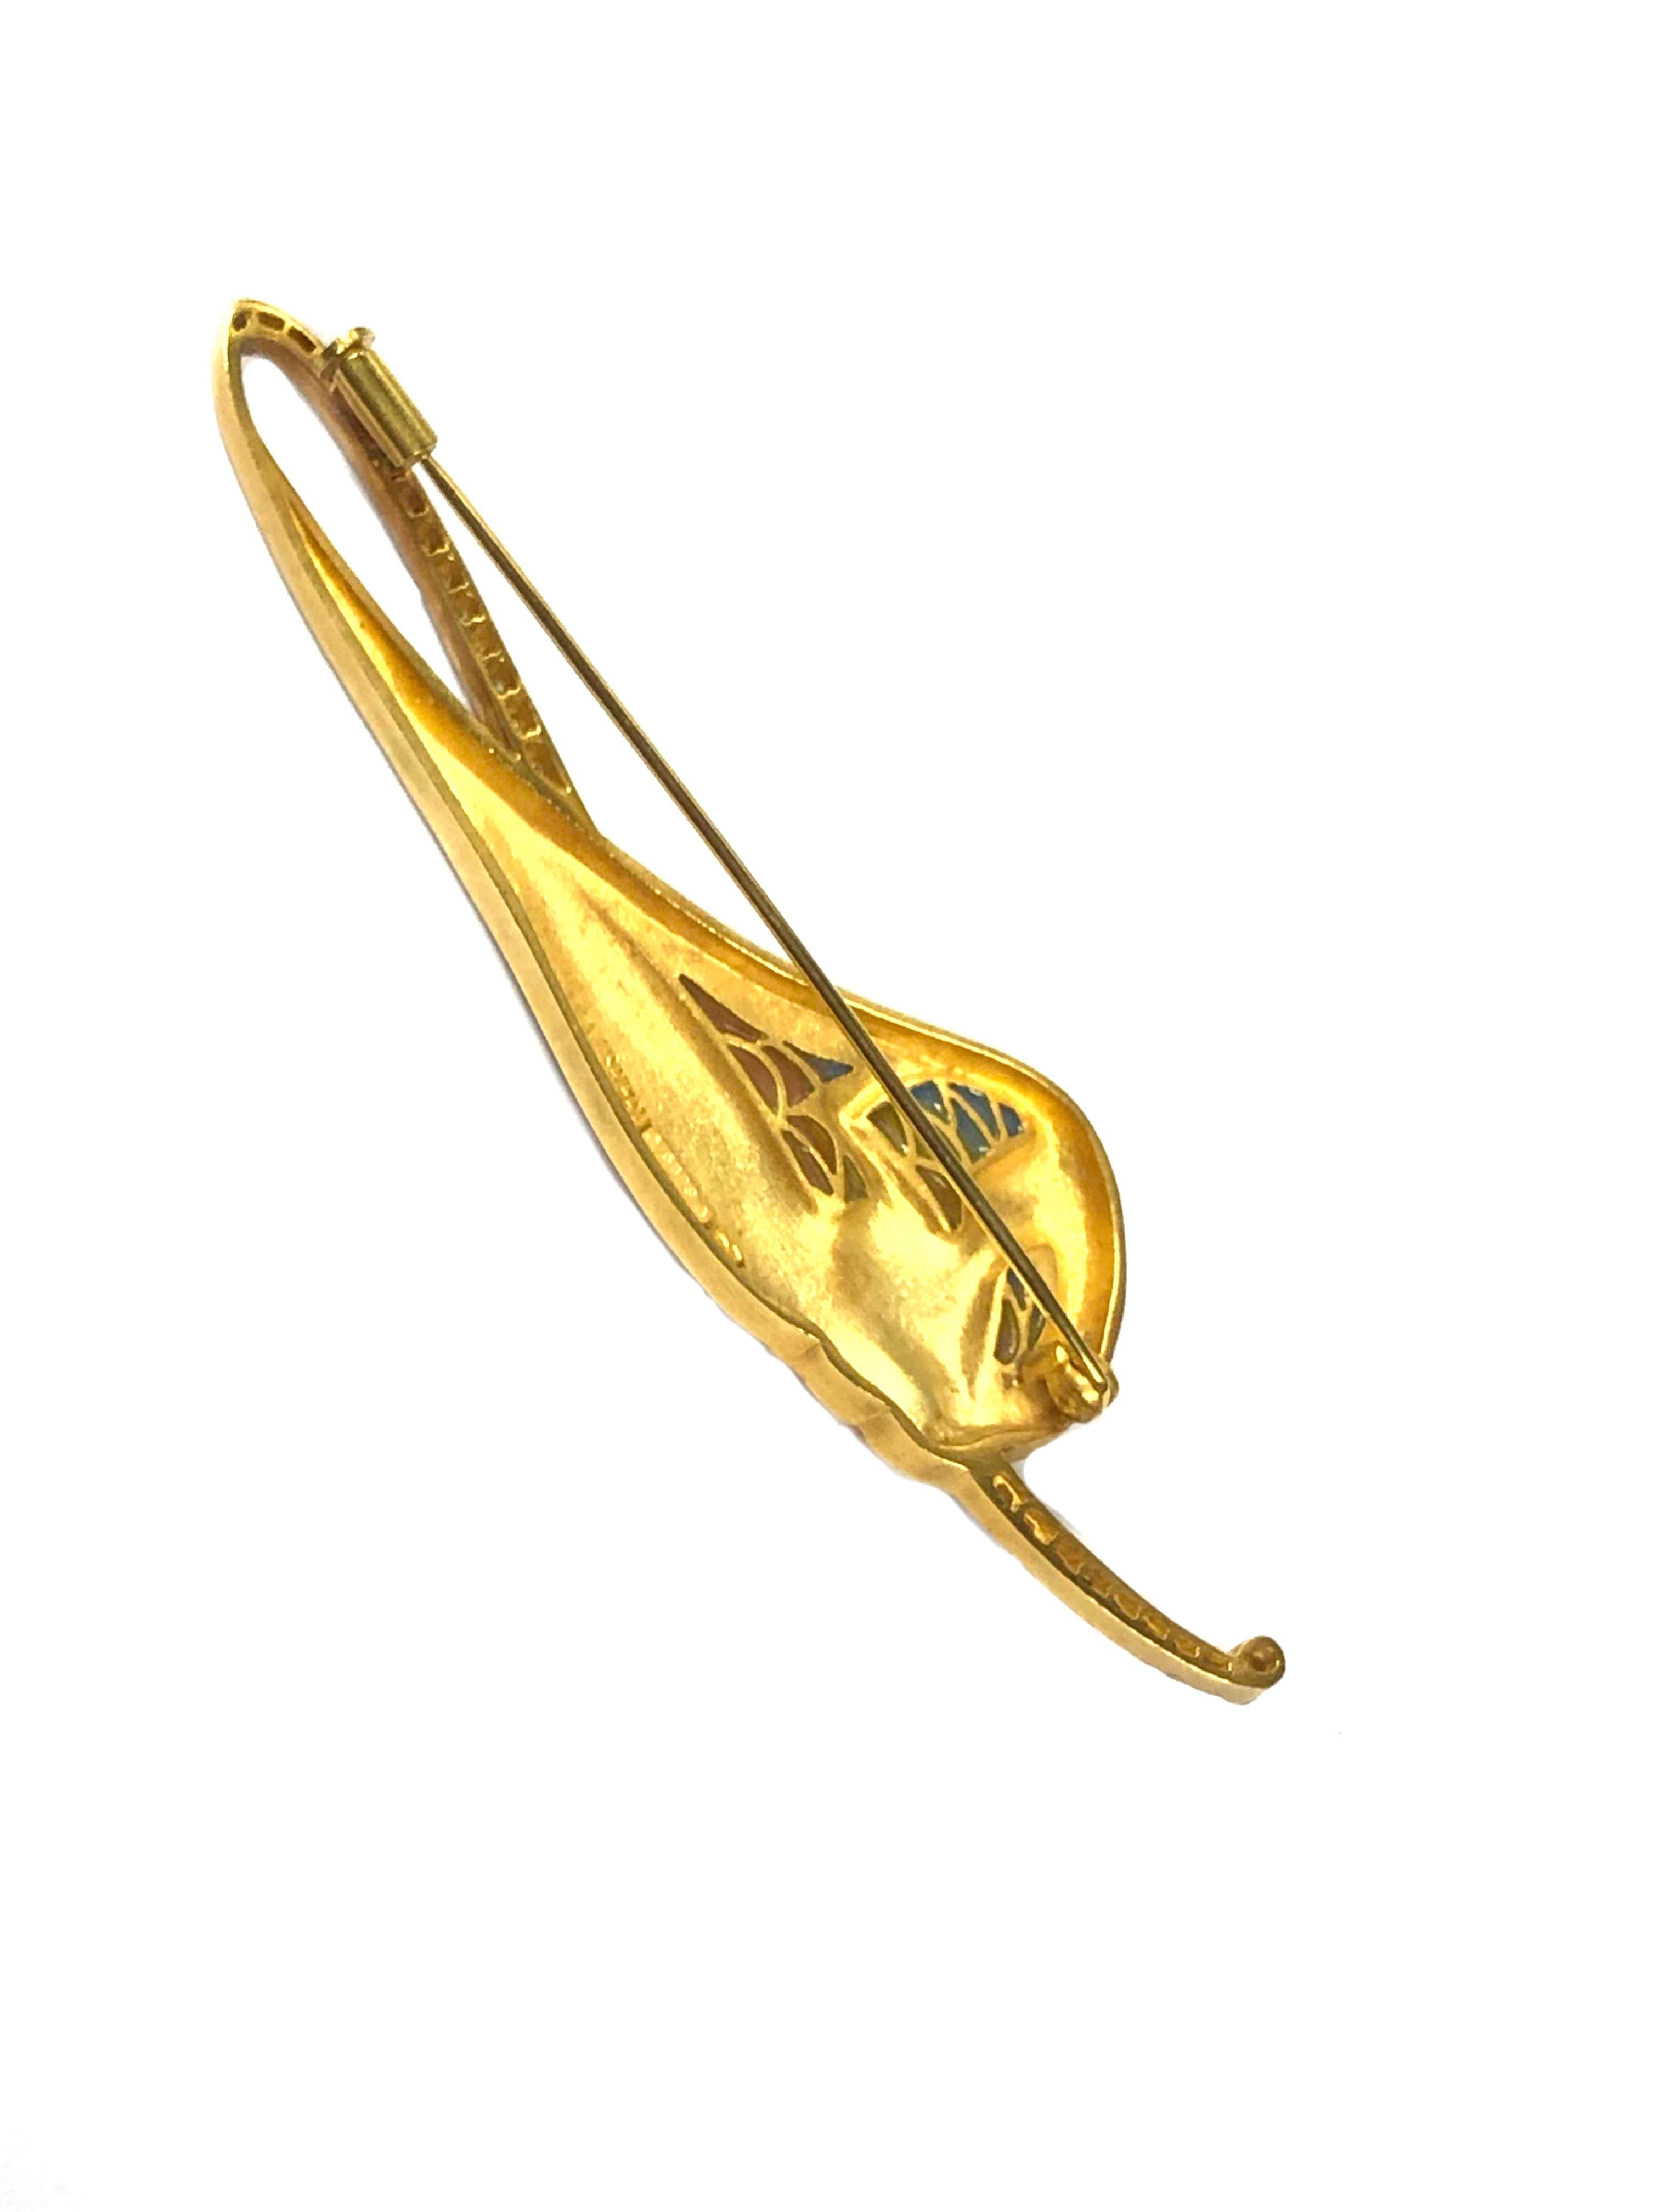 Circa 2000 Luis Masriera Spain, 18K Yellow Gold Art Nouveau Brooch, in the form of a reclining Woman and measuring 3 1/8 inches in length X 3/4 inch. Lightly frosted 18K yellow Gold finish with fine Opaline Enamel and colorful Plique Enamel. Further